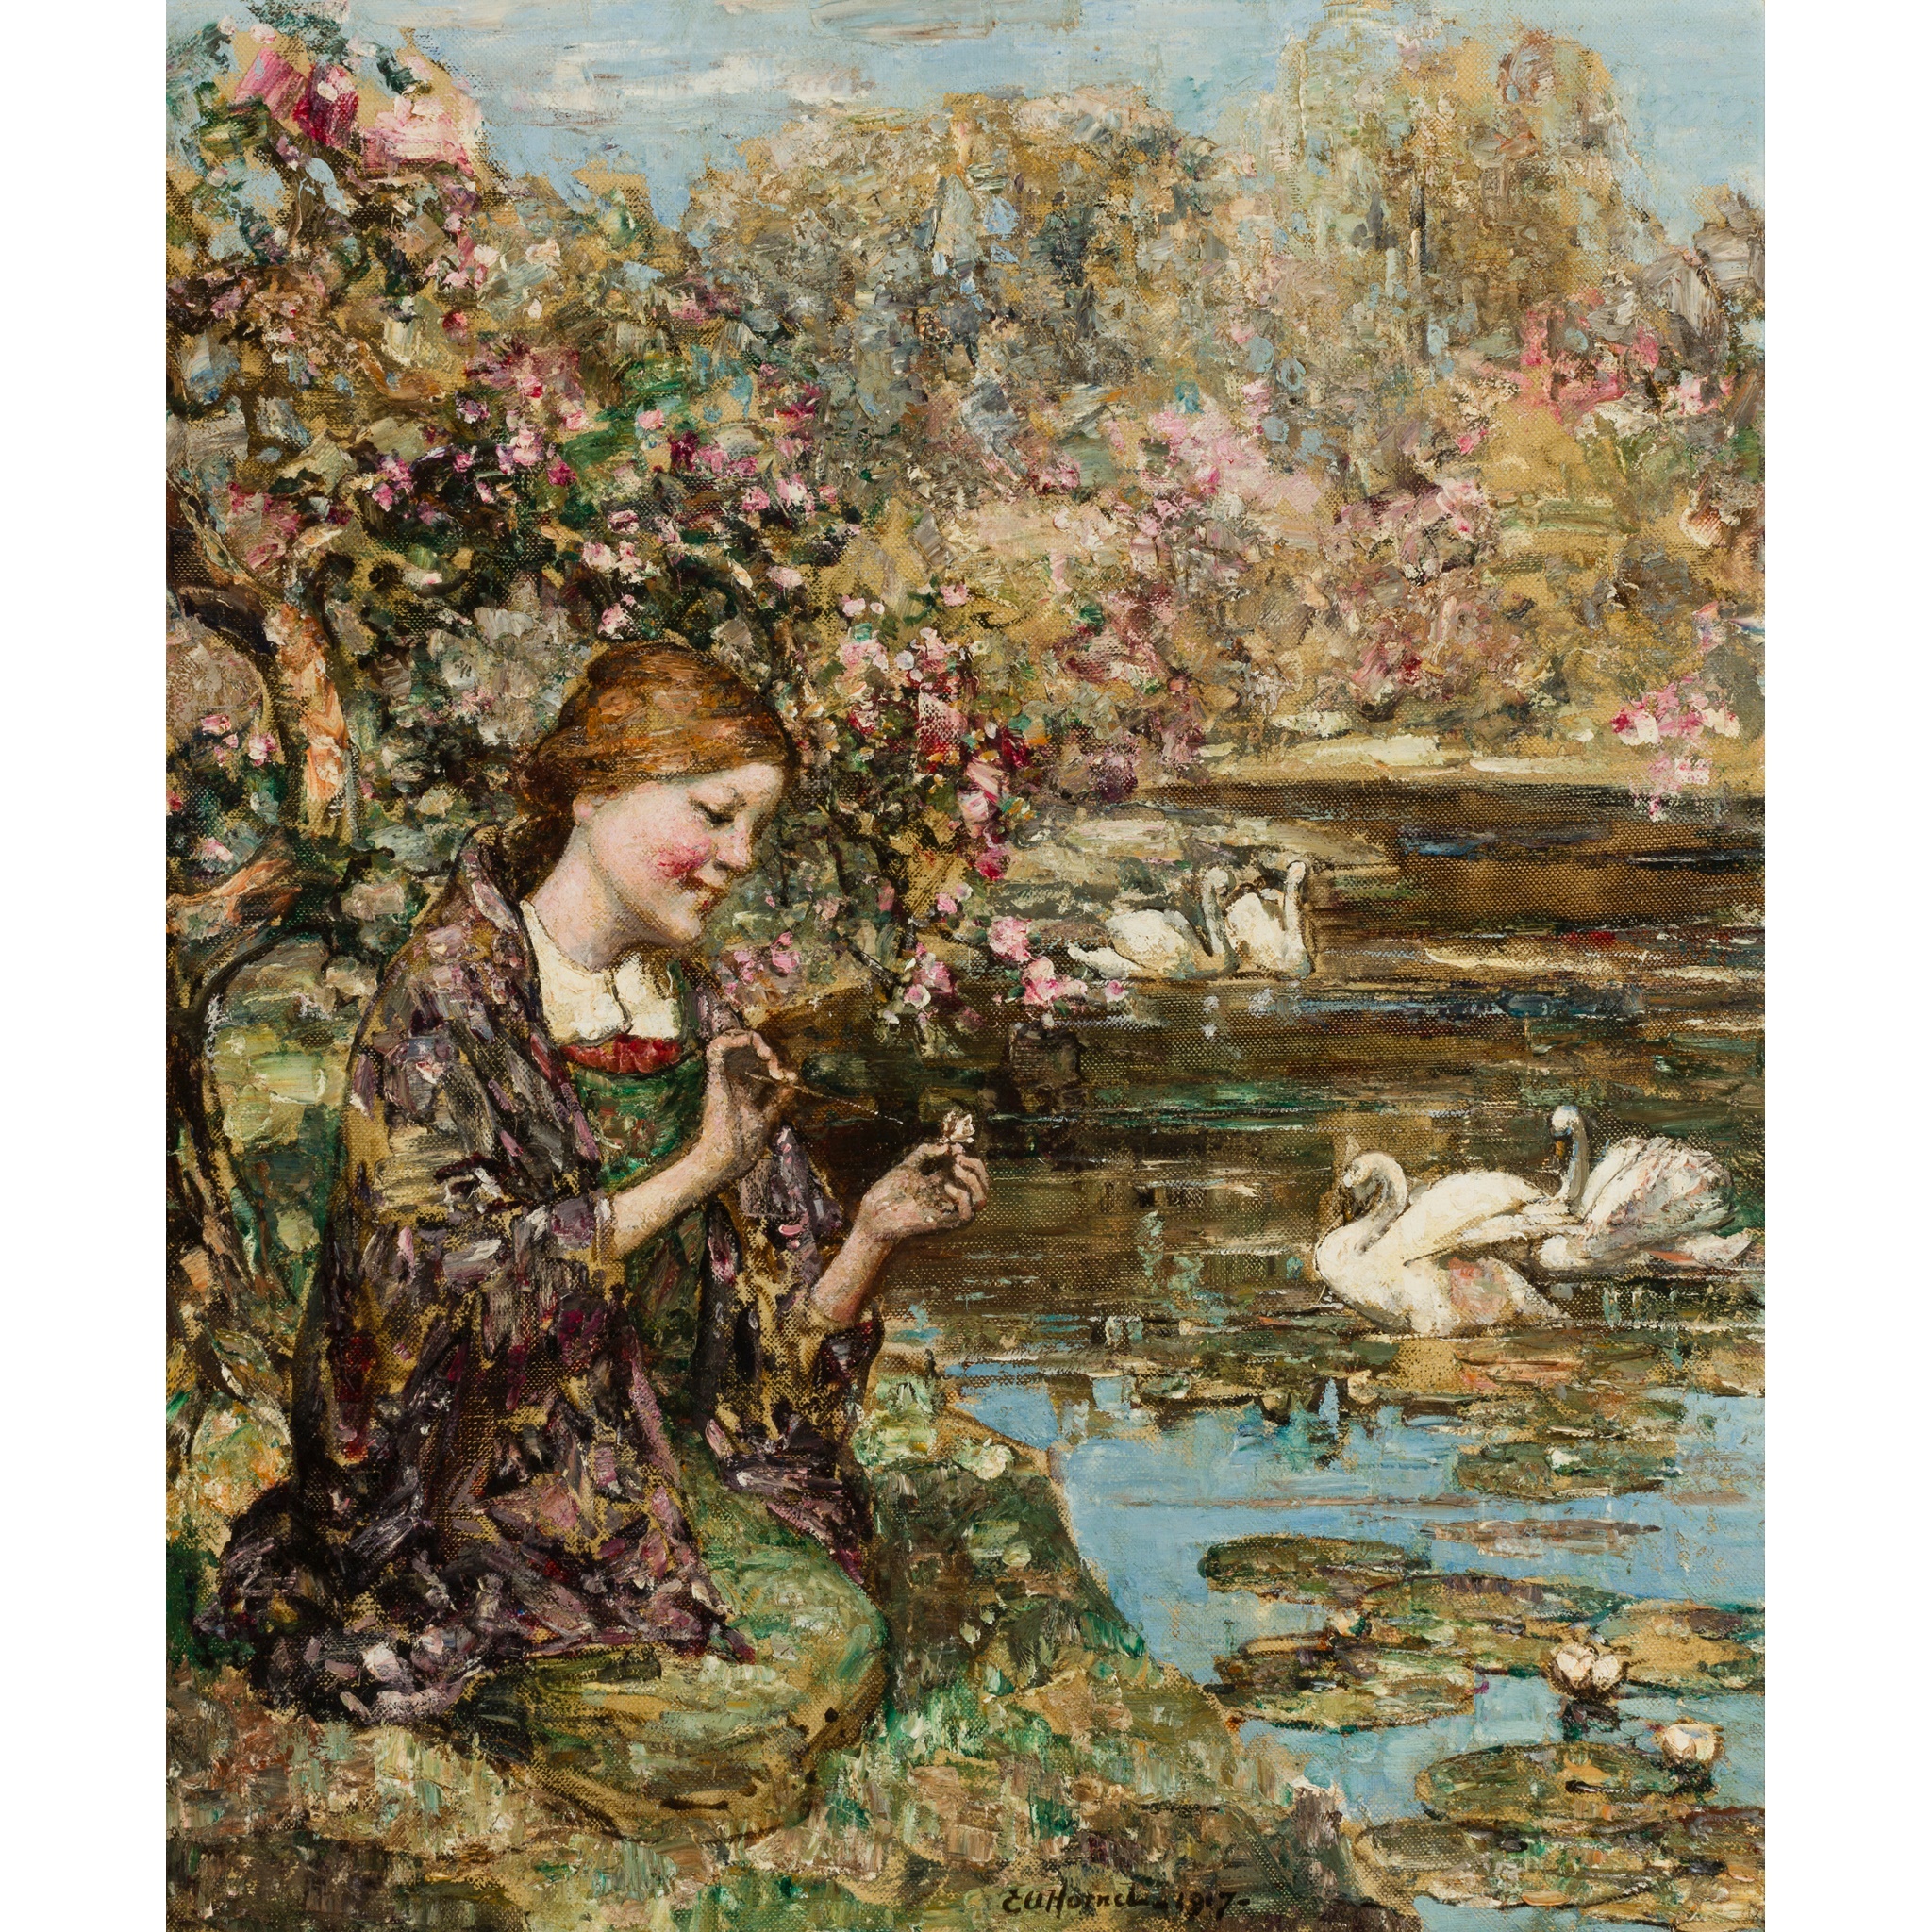 EDWARD ATKINSON HORNEL (SCOTTISH 1864-1933) | SWAN LAKE Signed and dated 1917, oil on canvas | 765cm x 63cm (30in x 25in) Sold for £13,750 incl premium